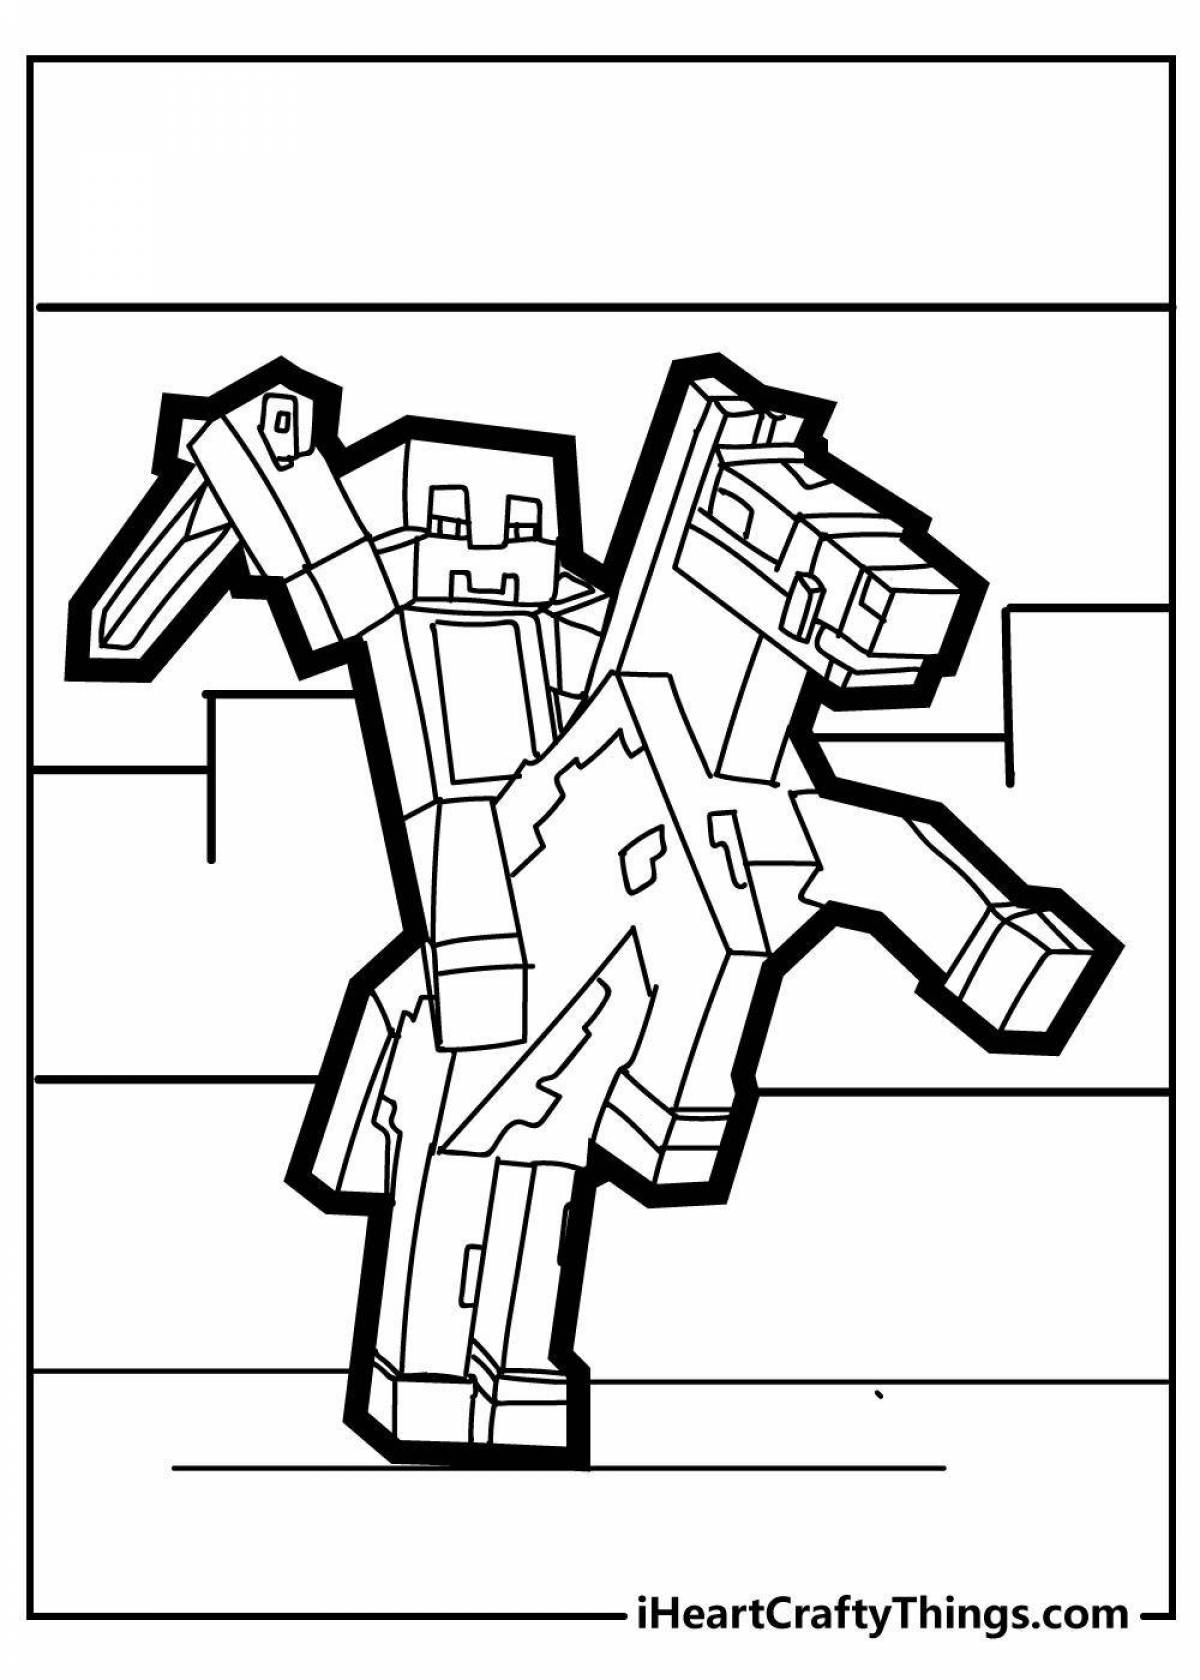 Majestic minecraft dungeon coloring page